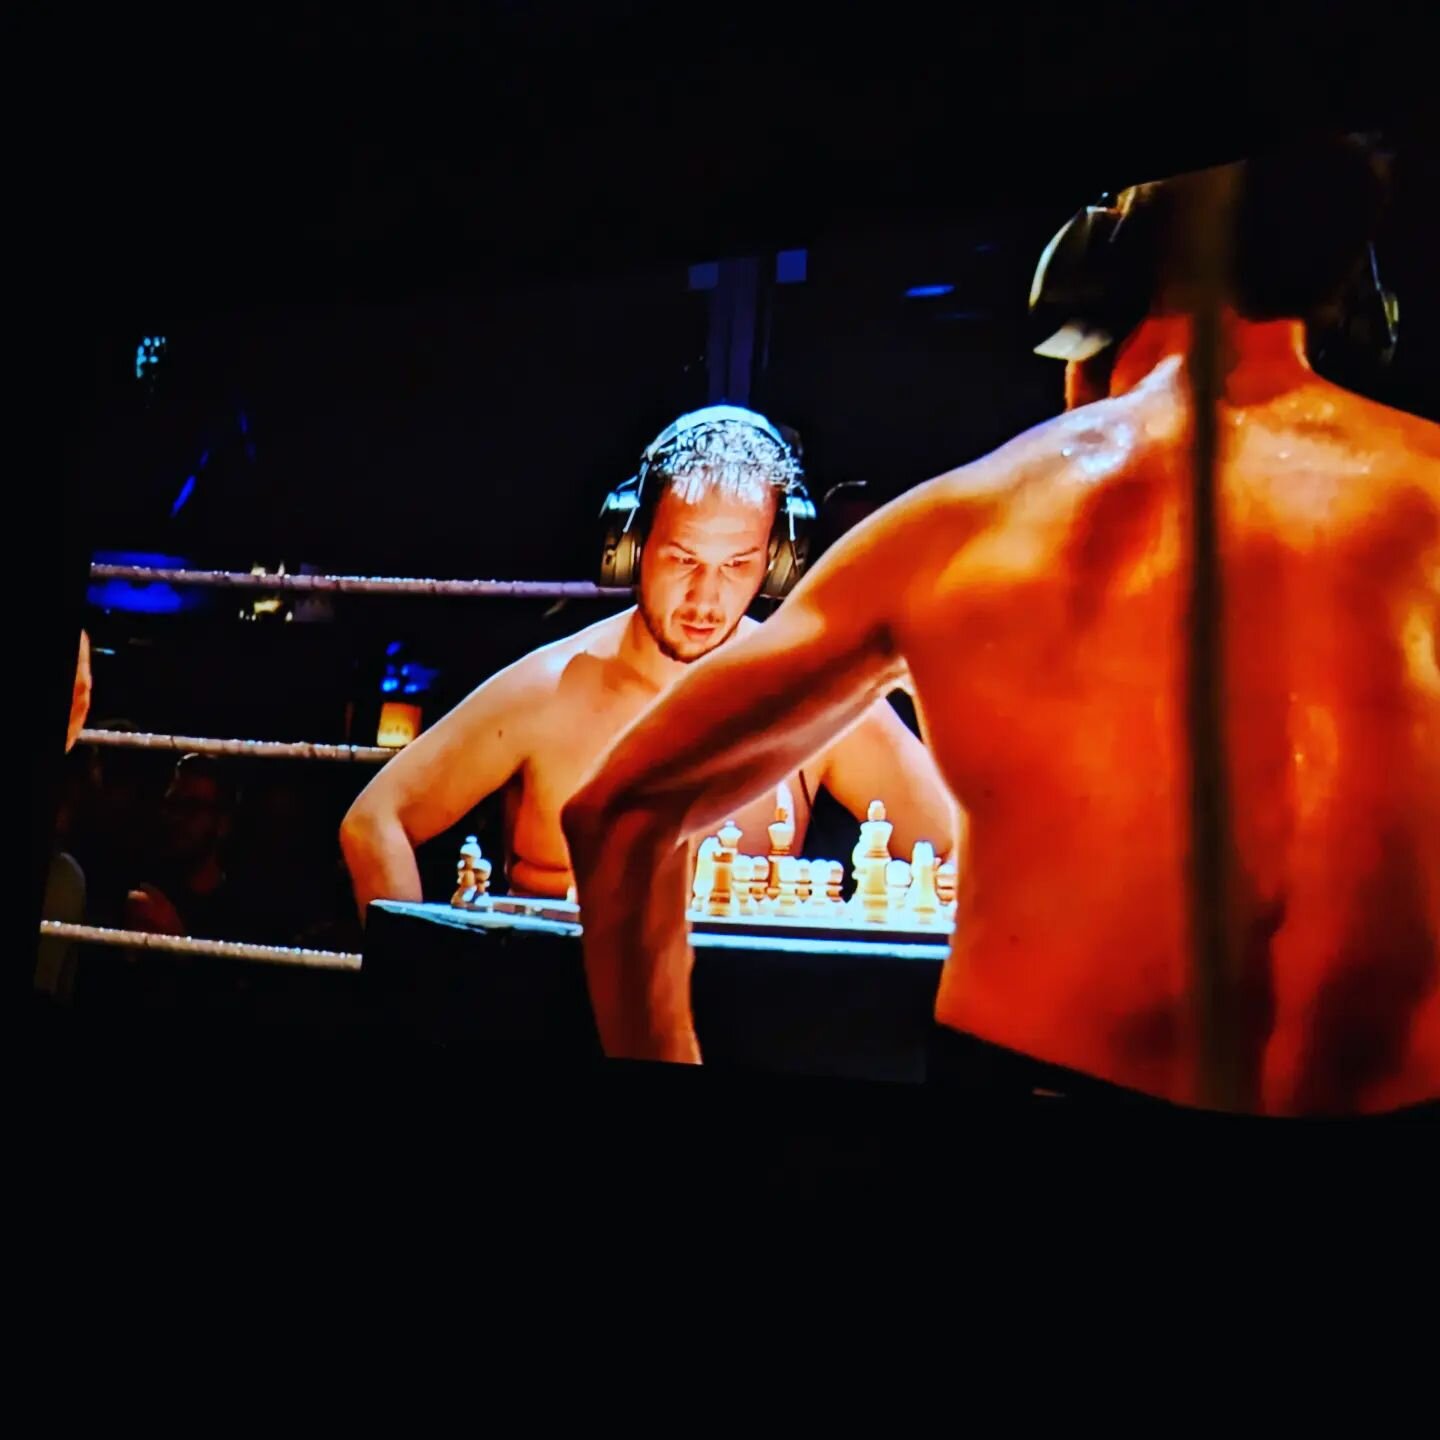 Chess Boxing on the big screen at the Intellectual Fight Club in the new film King Chess! #chess #kingchess #chessboxing